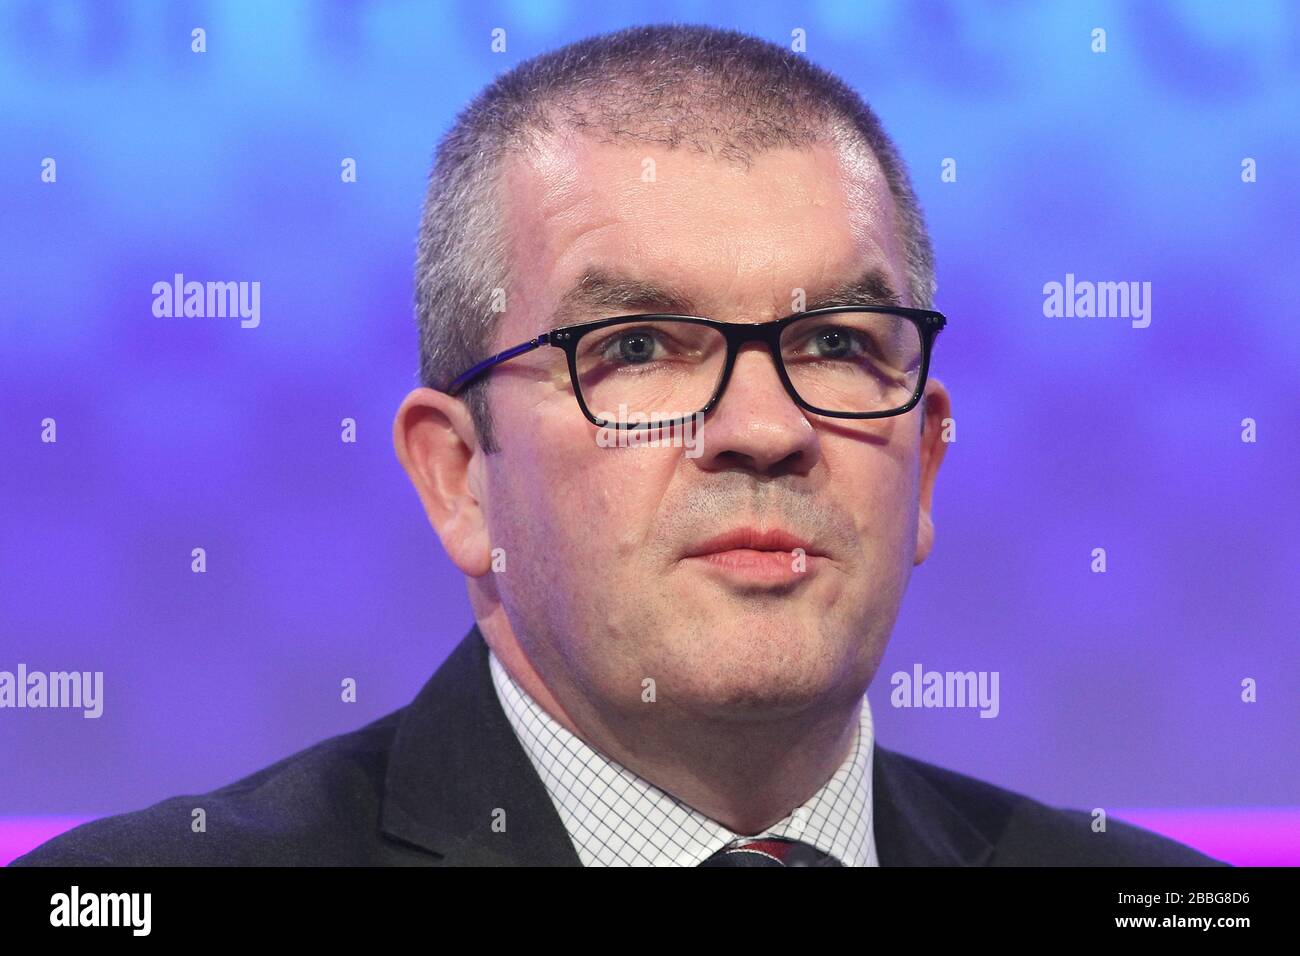 Martin Hewitt is Chair of the National Police Chiefs' Council and was speaking at their conference in February 2020. Stock Photo